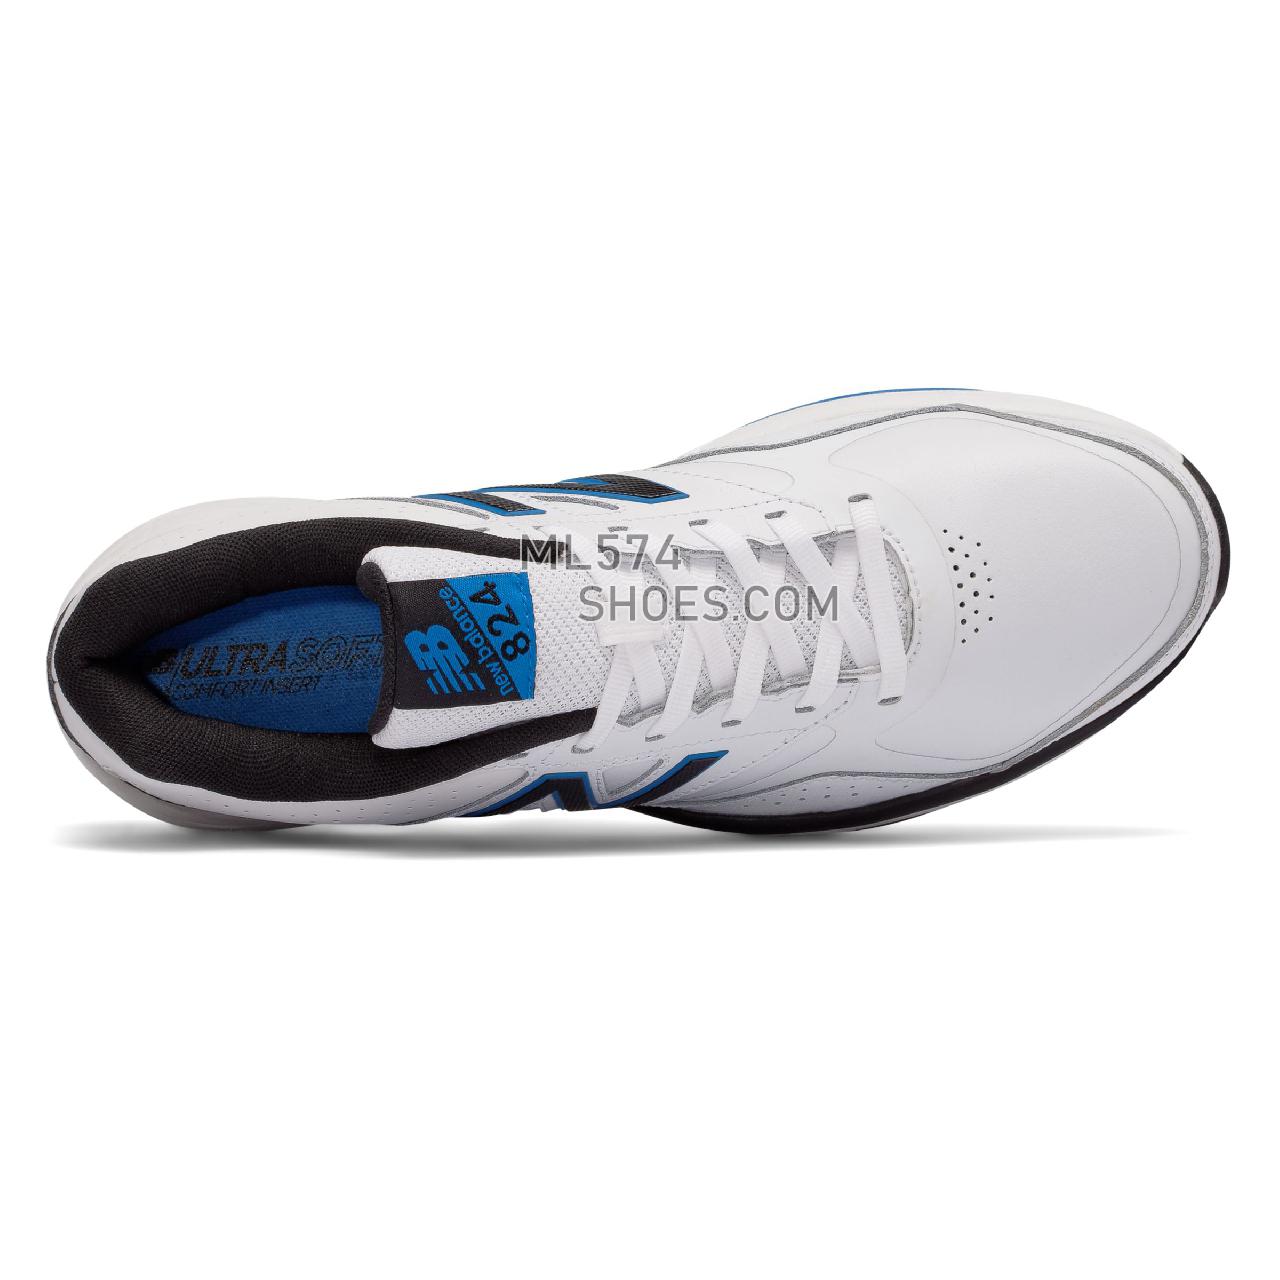 New Balance New Balance 824 Trainer - Men's 824 - X-training White with Black and Placid Blue - MX824WB1